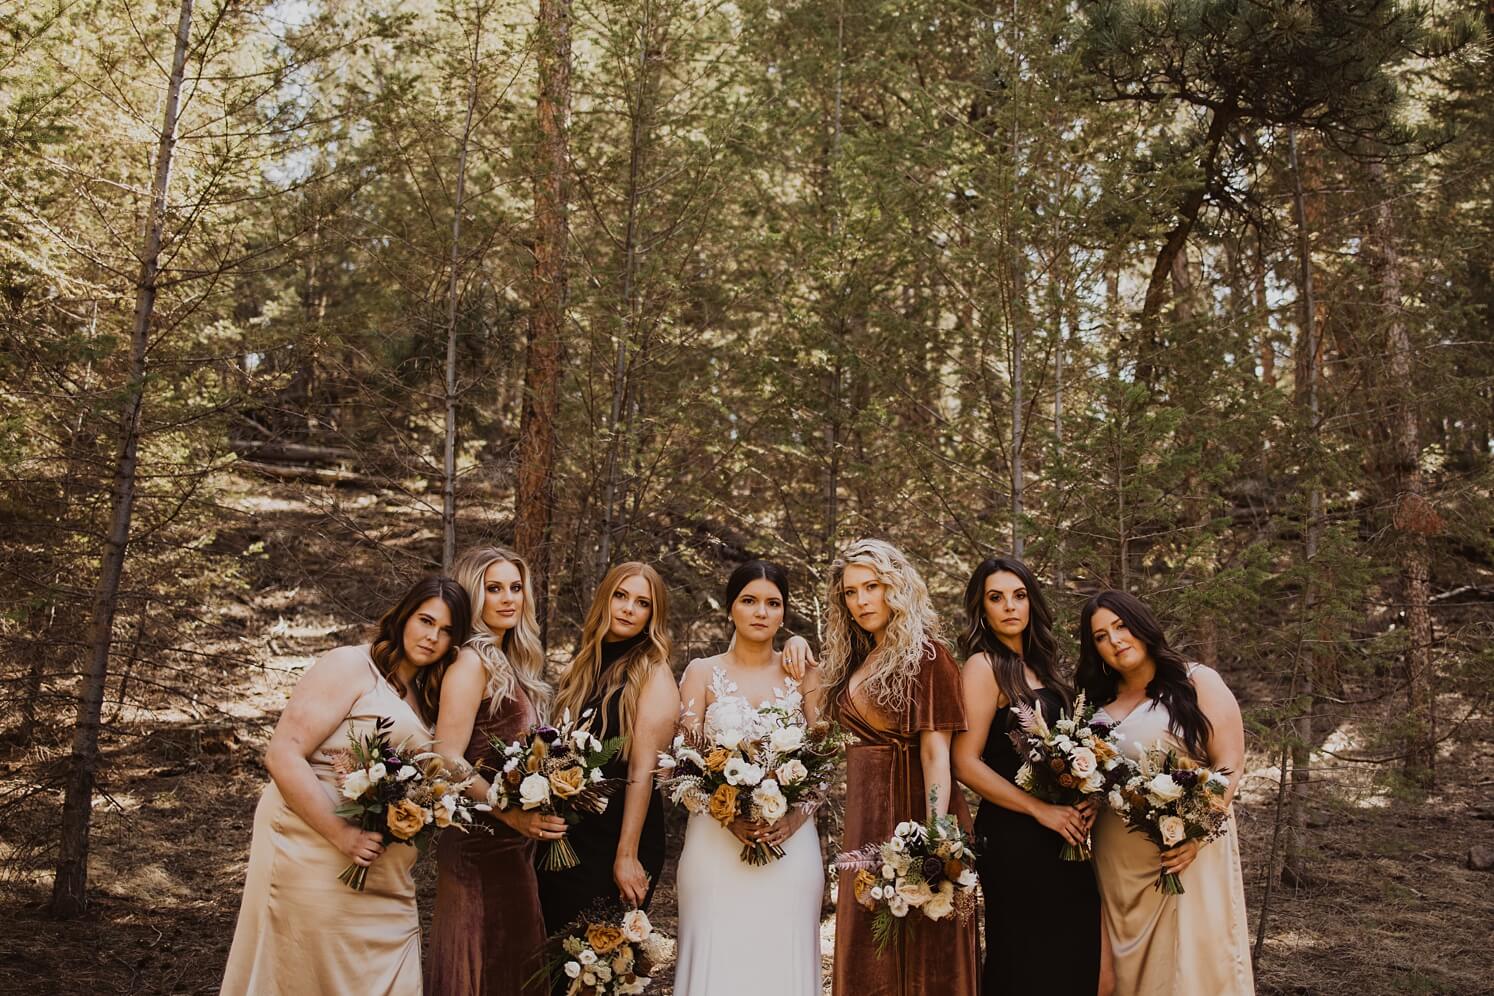 Bride with bridesmaids in shades of brown | McArthur Weddings and Events